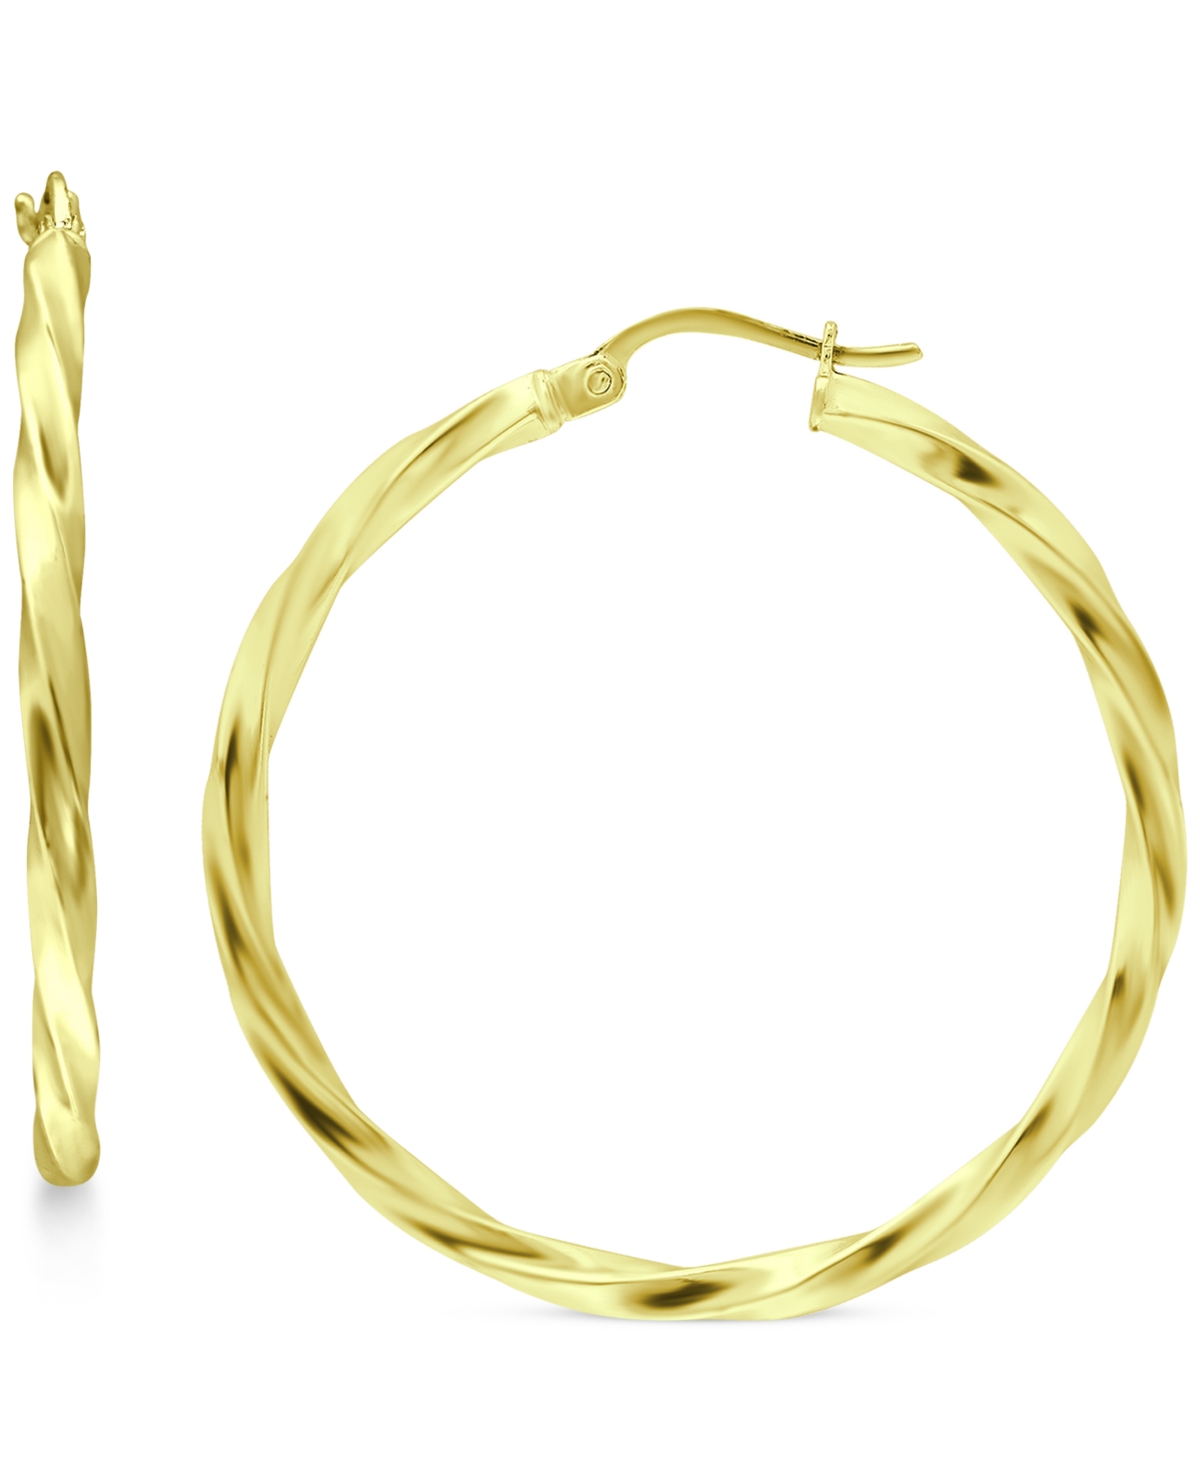 Twist Hoop Earrings in 18k Gold-Plated Sterling Silver, Created for Macy's - Gold Over Silver